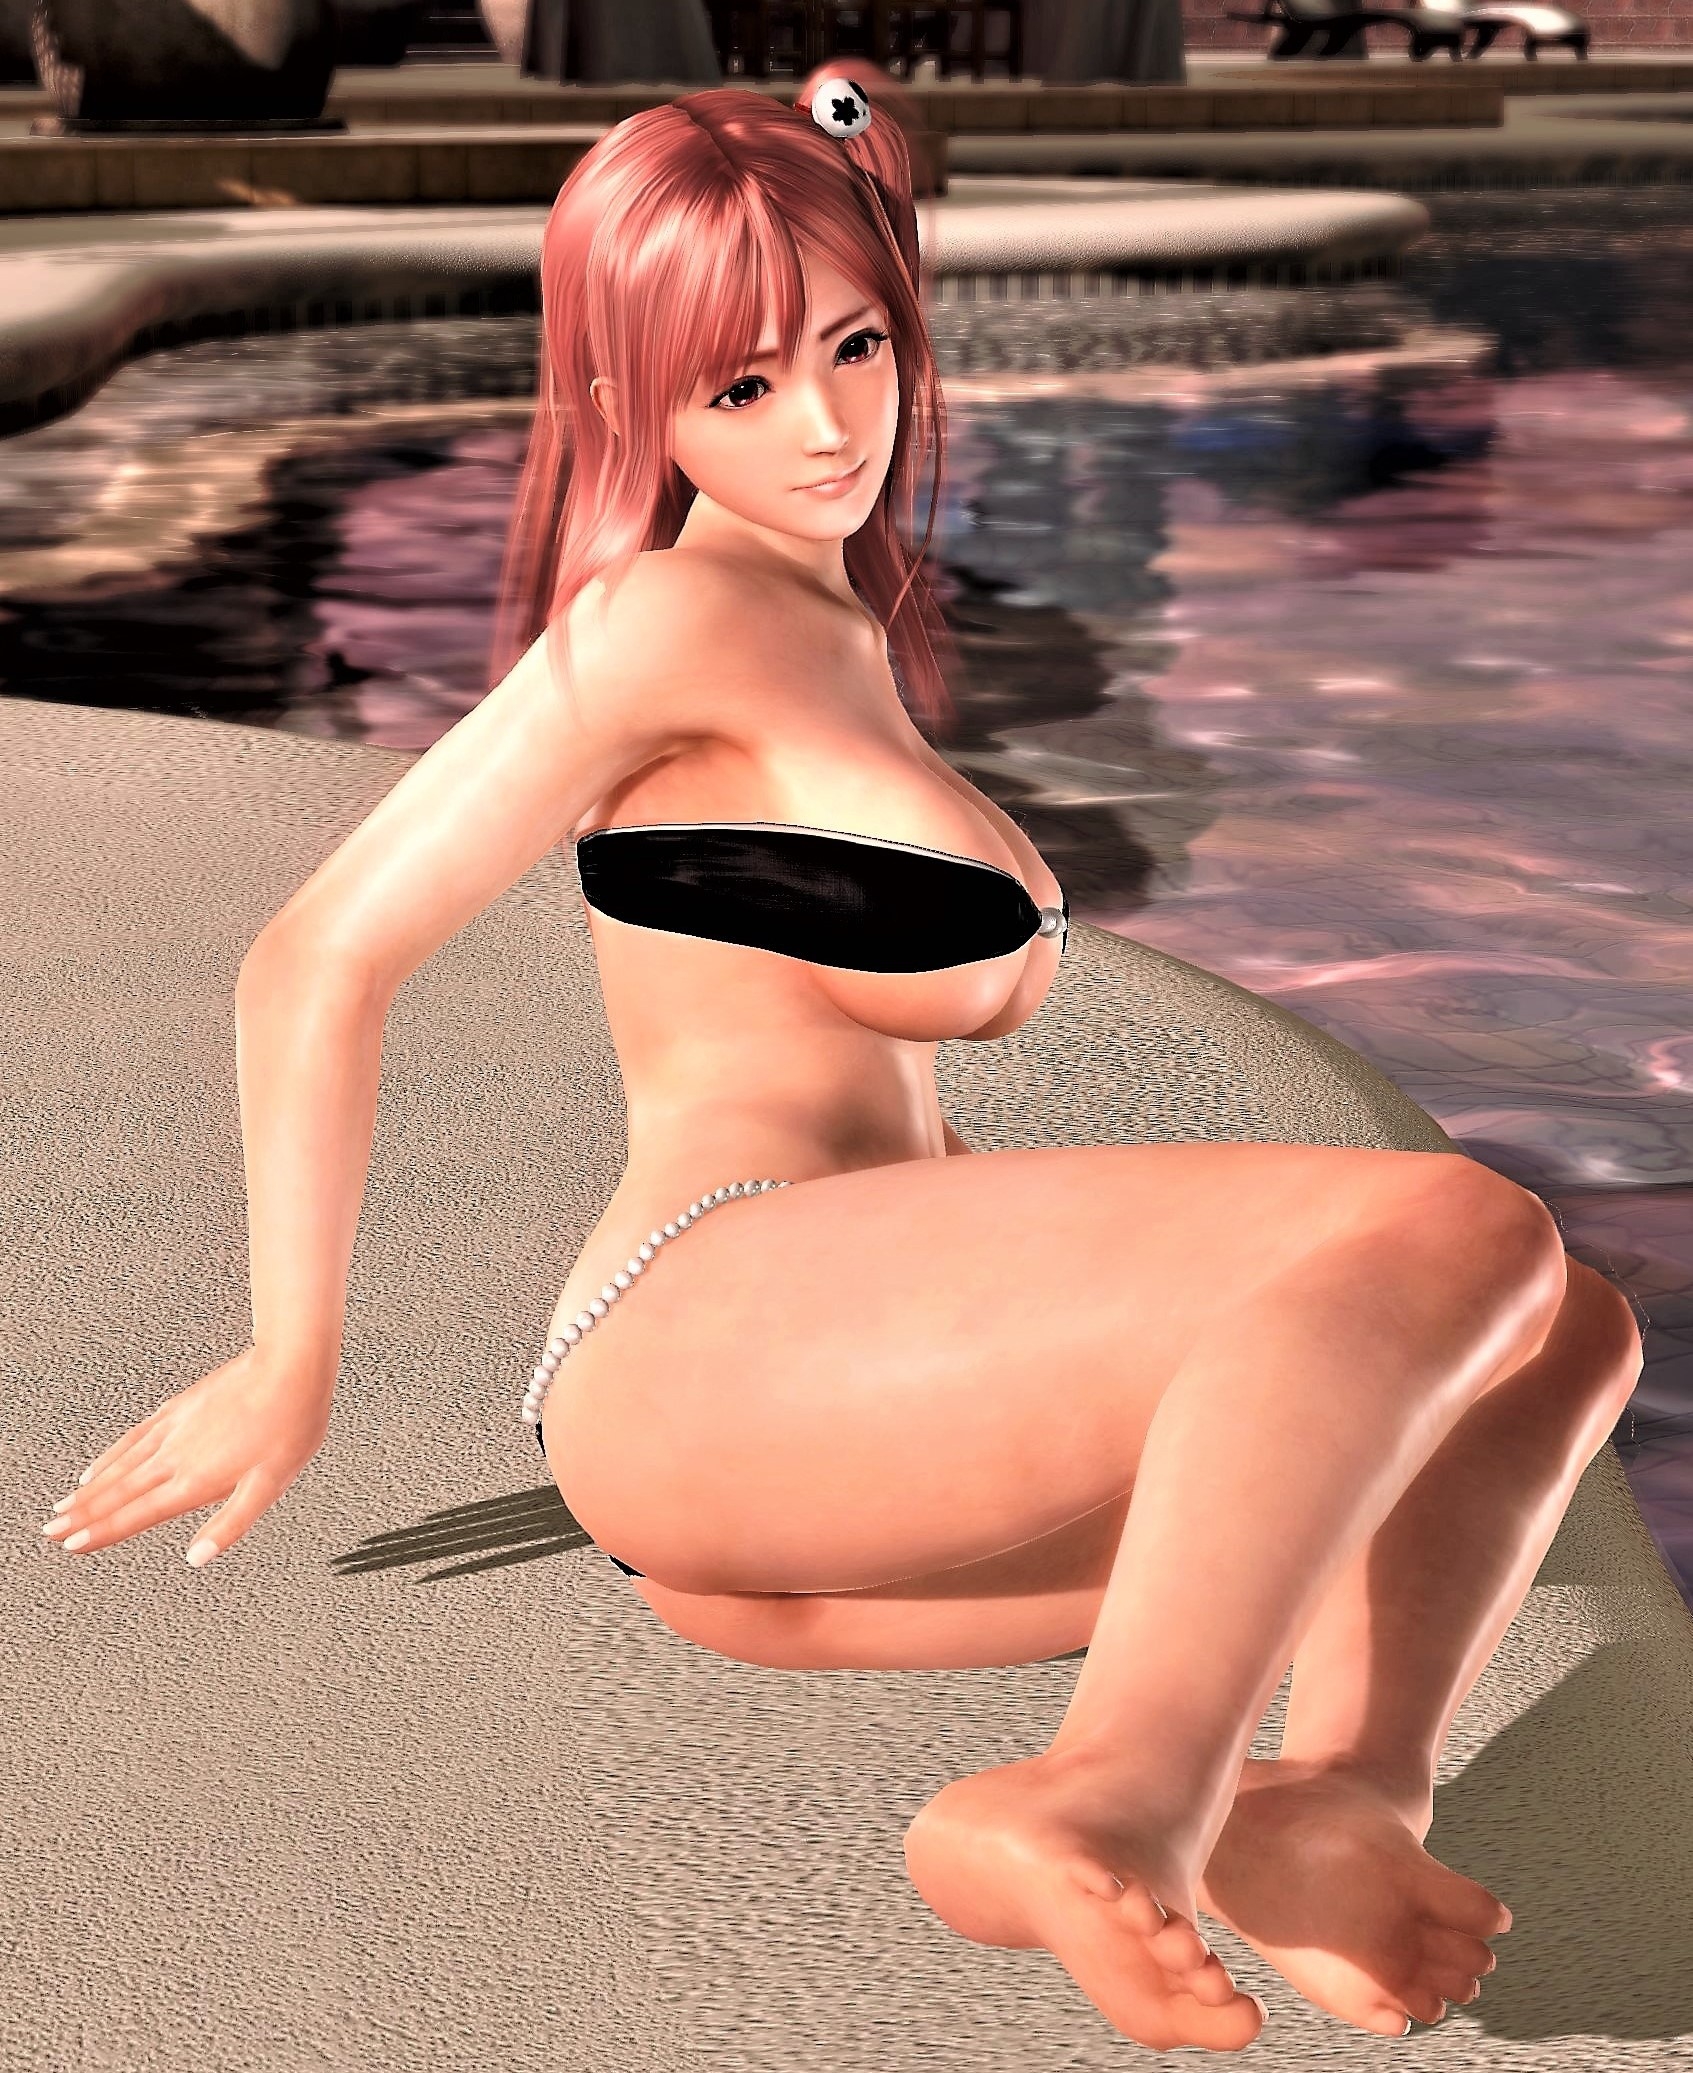 Dead Or Alive Xtreme 3 Porn